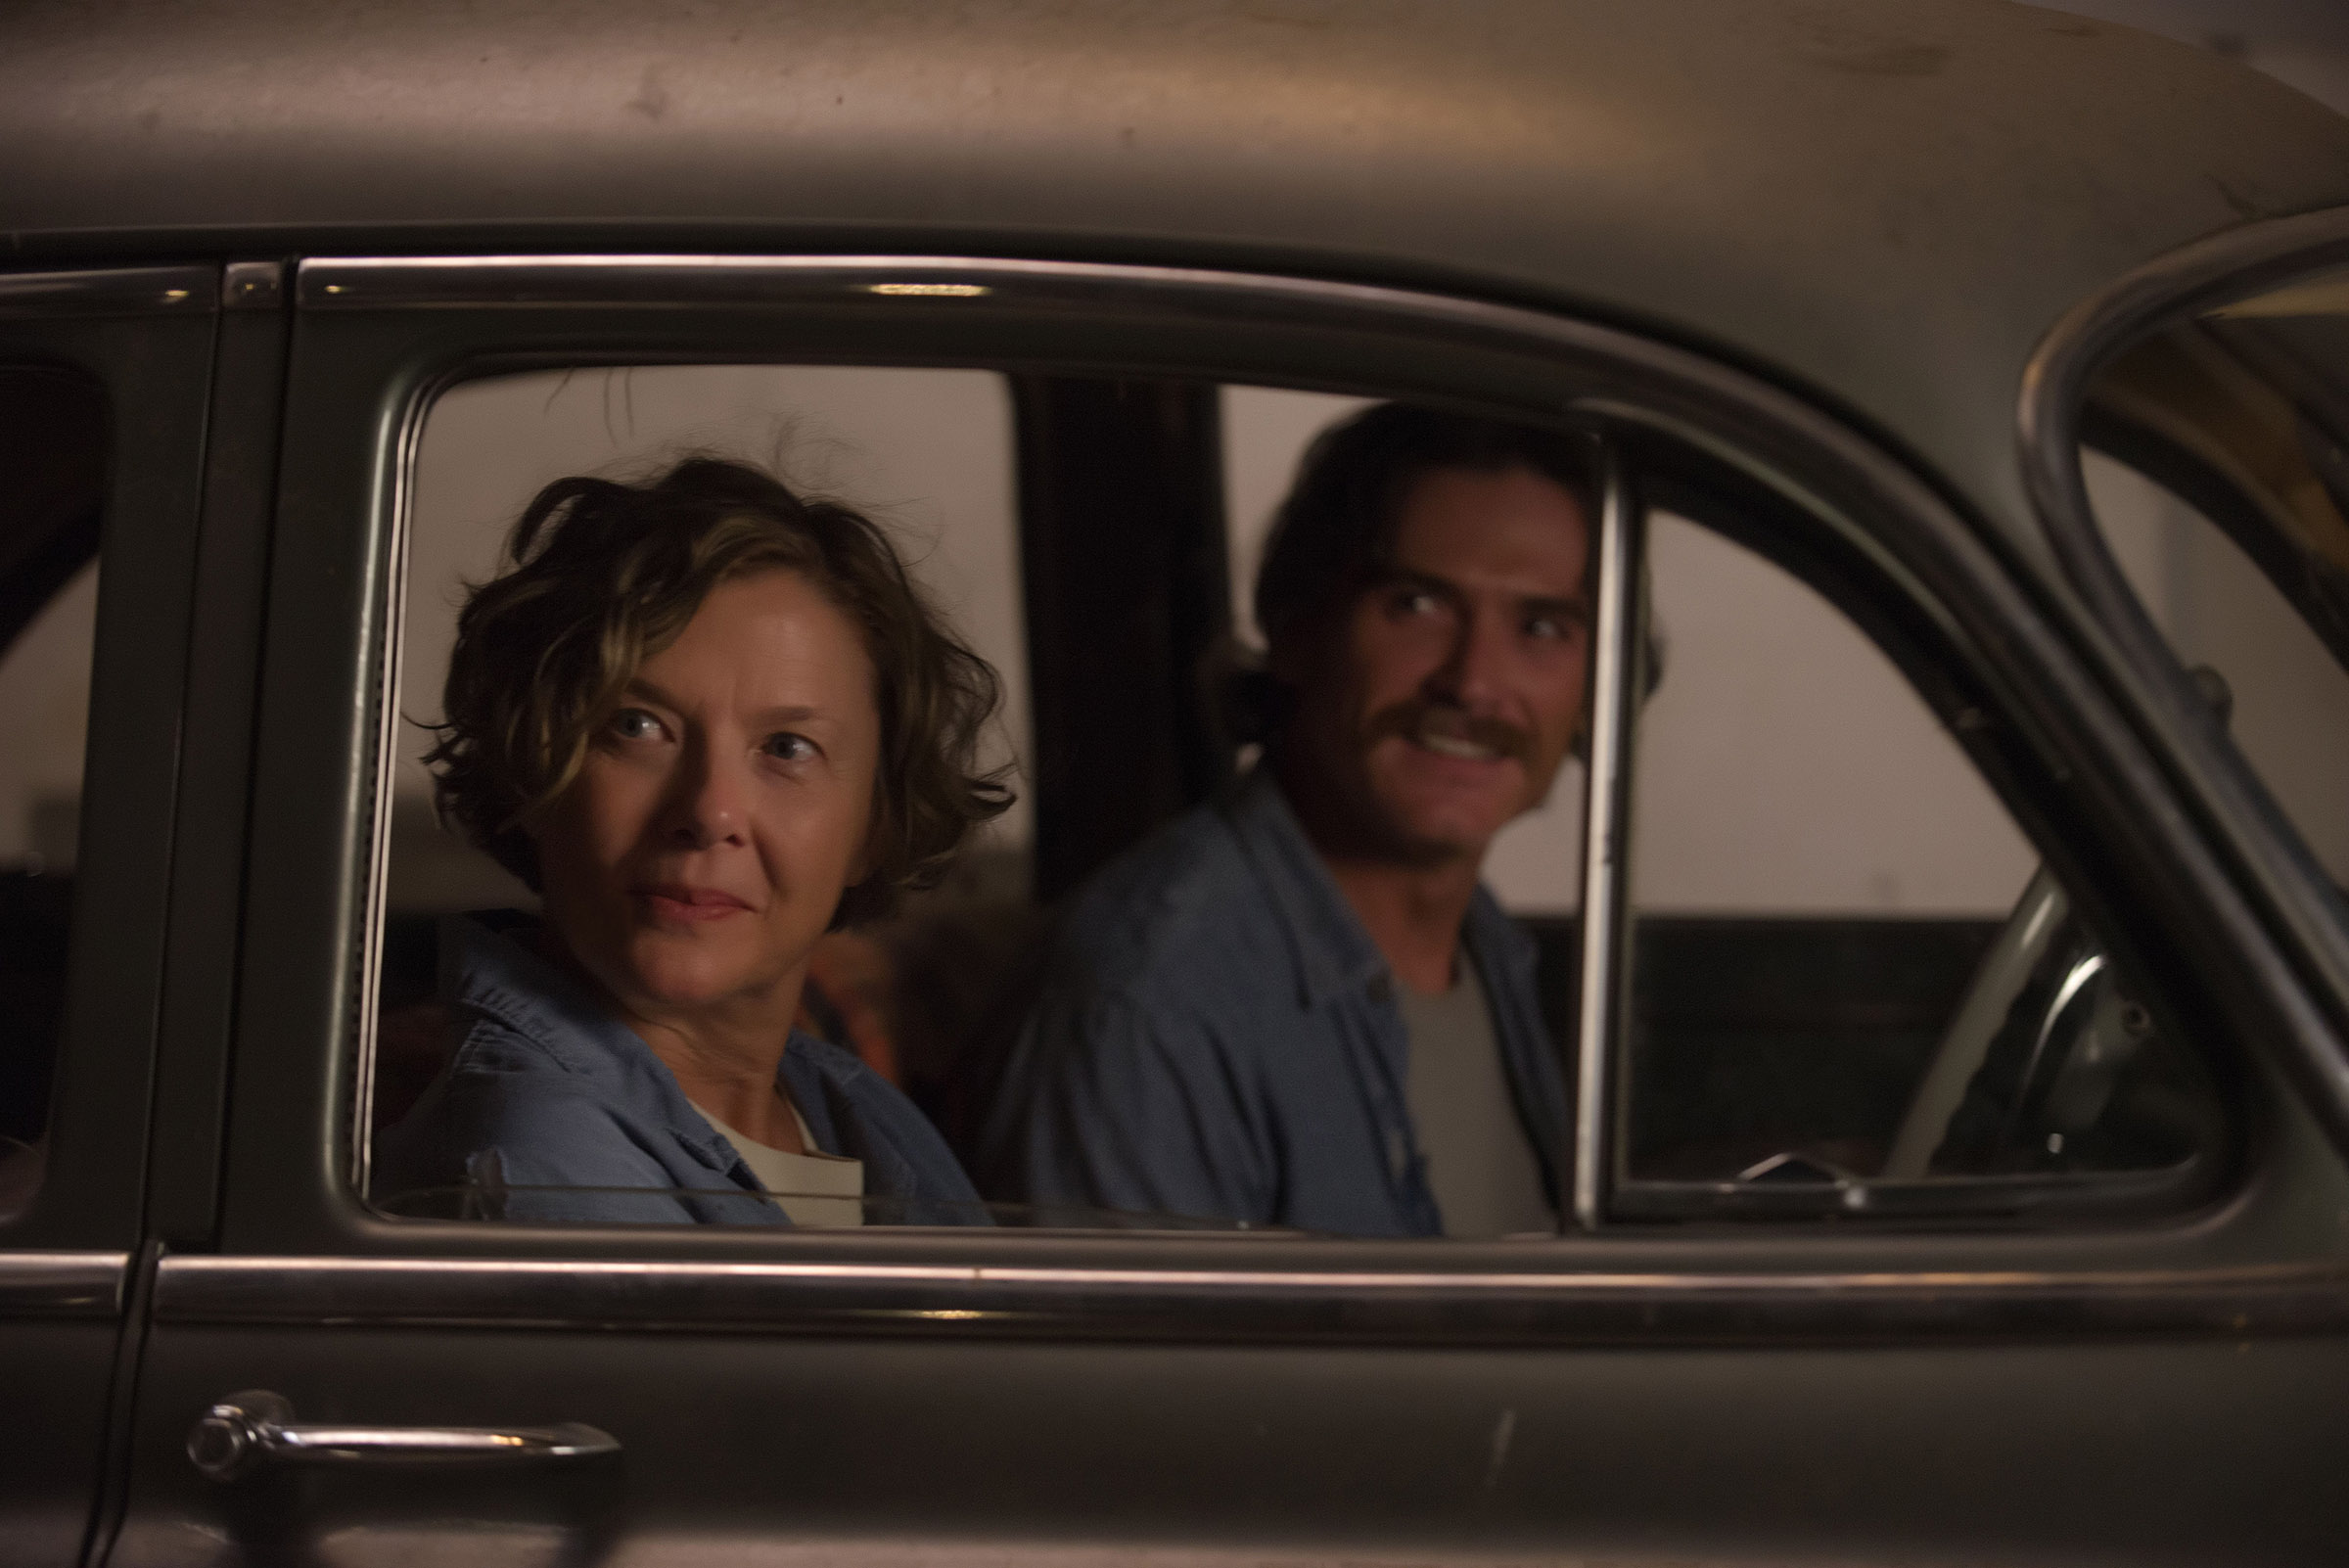 (L-R) Annette Bening and Billy Crudup in 20th Century Women. (A24/Everett Collection)